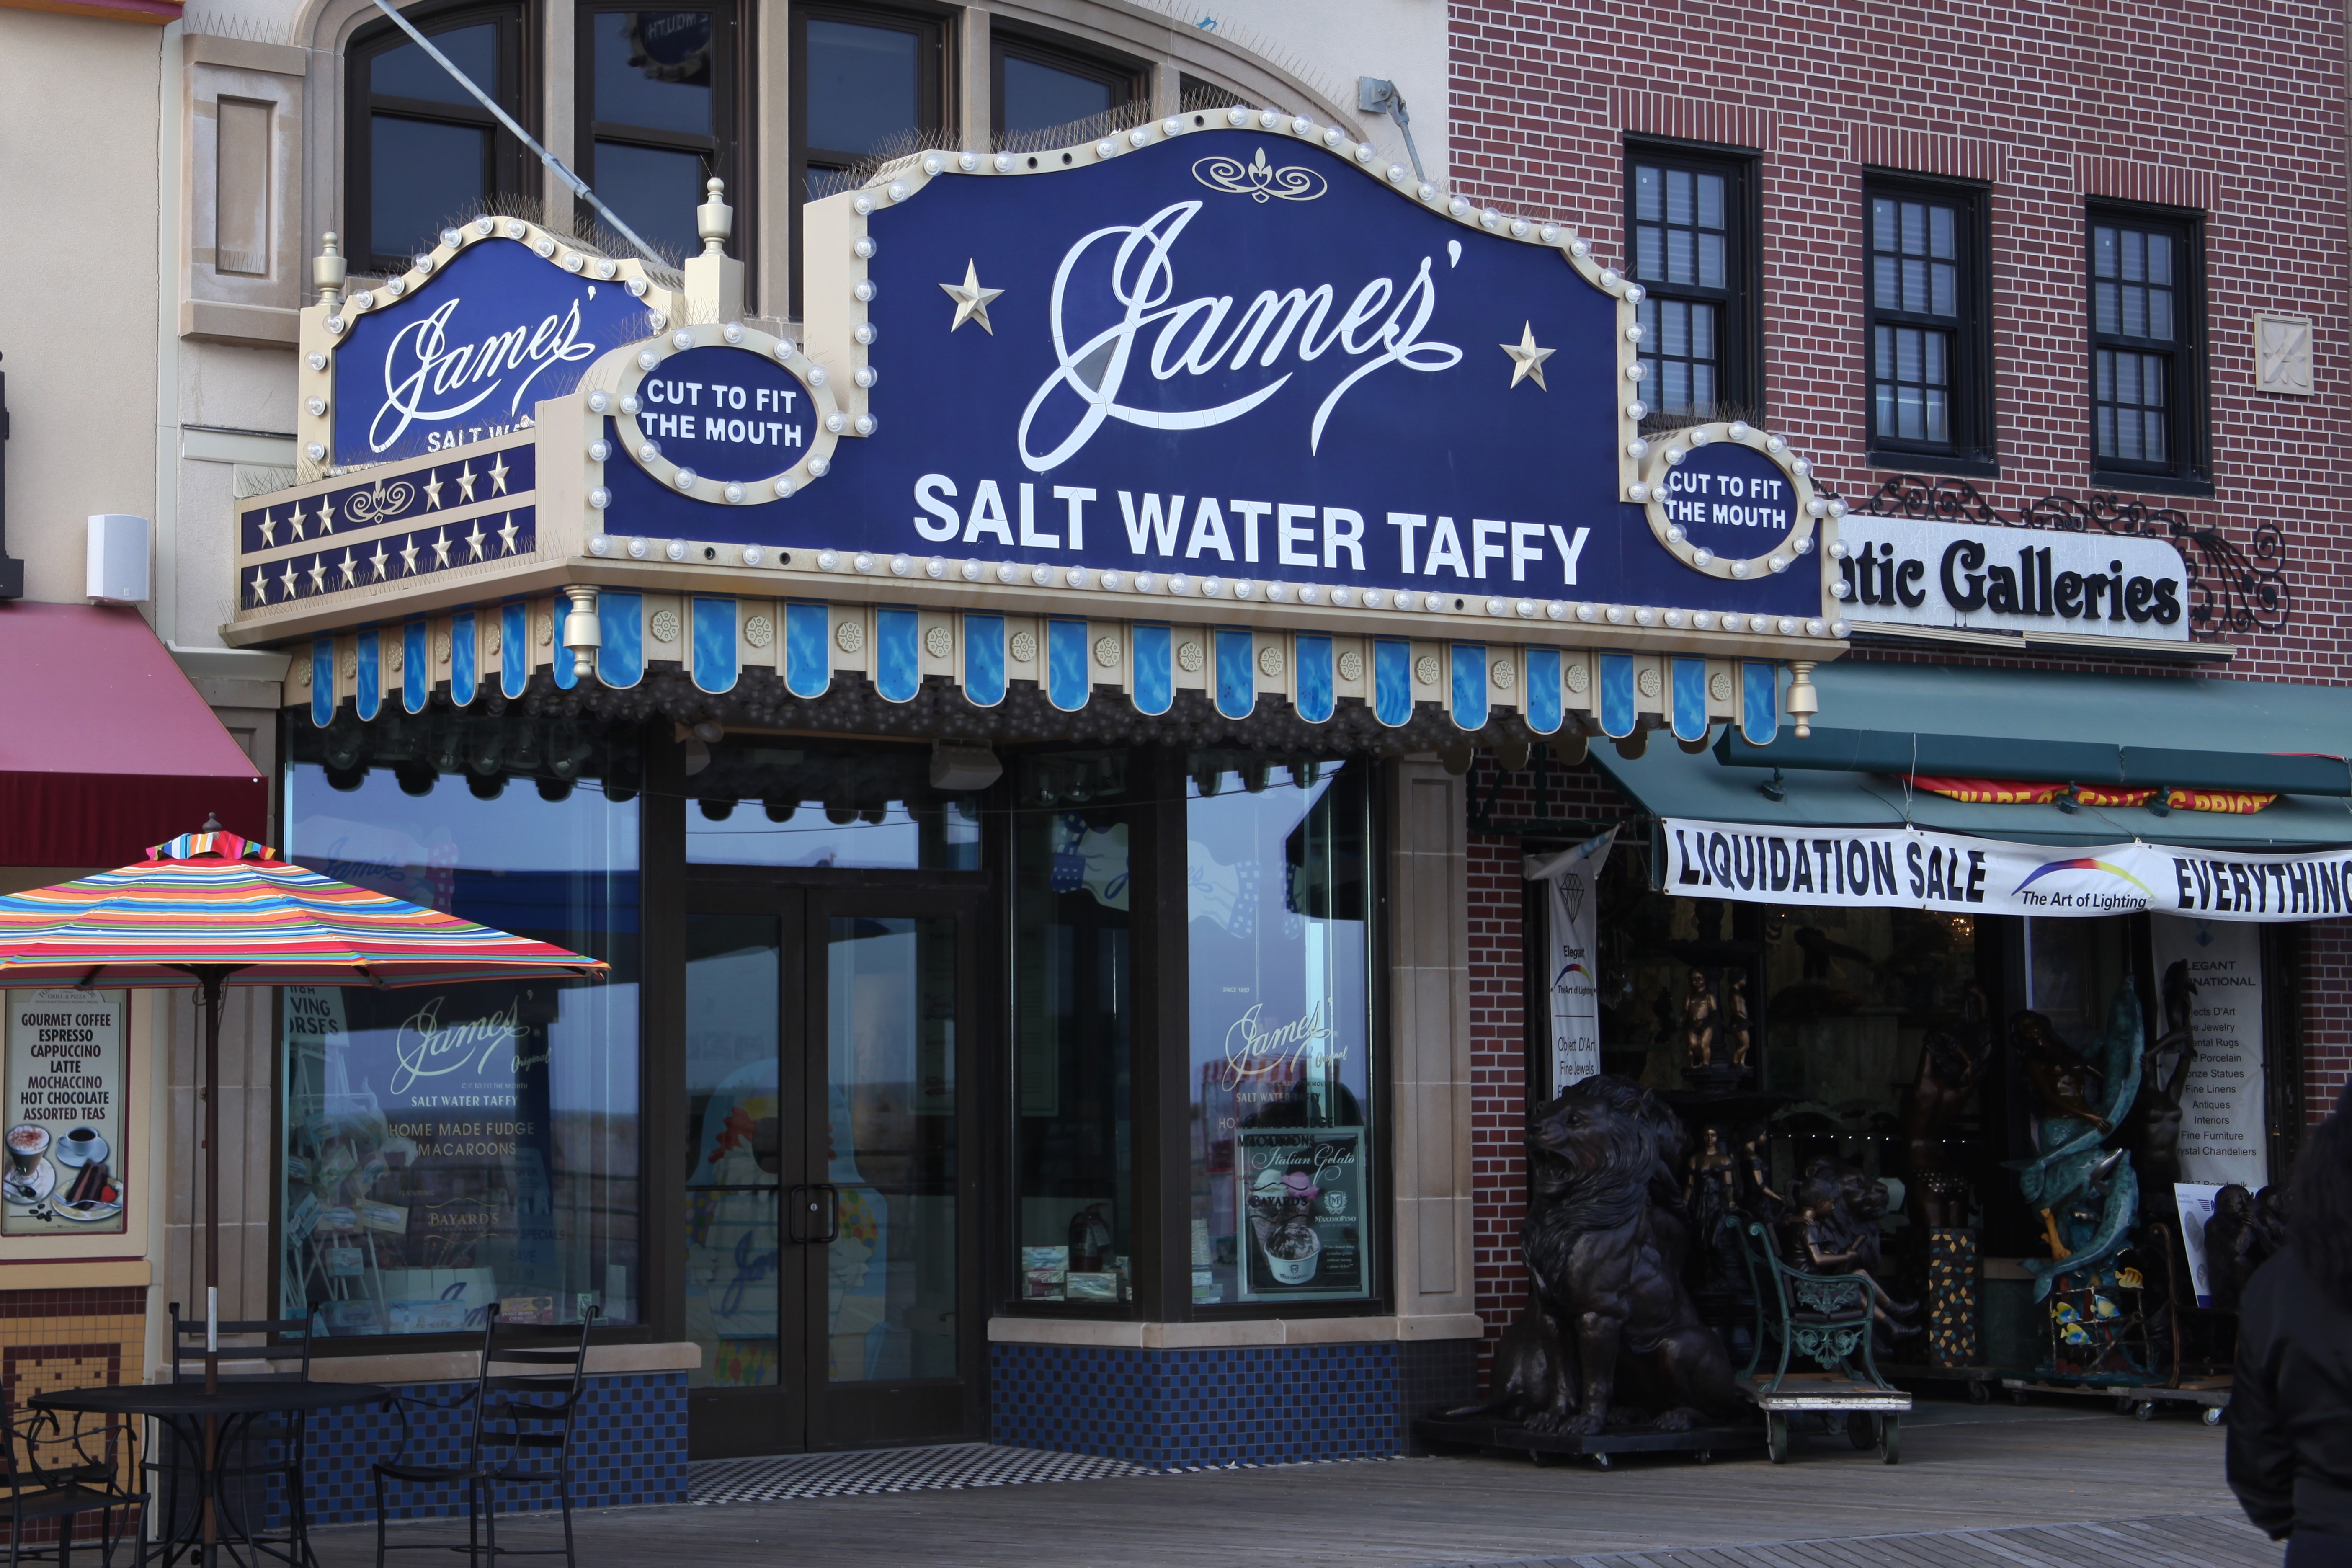 Hang it on a Hook and Pull with all your Might. We’re Makin’ Salt Water Taffy Tonight!